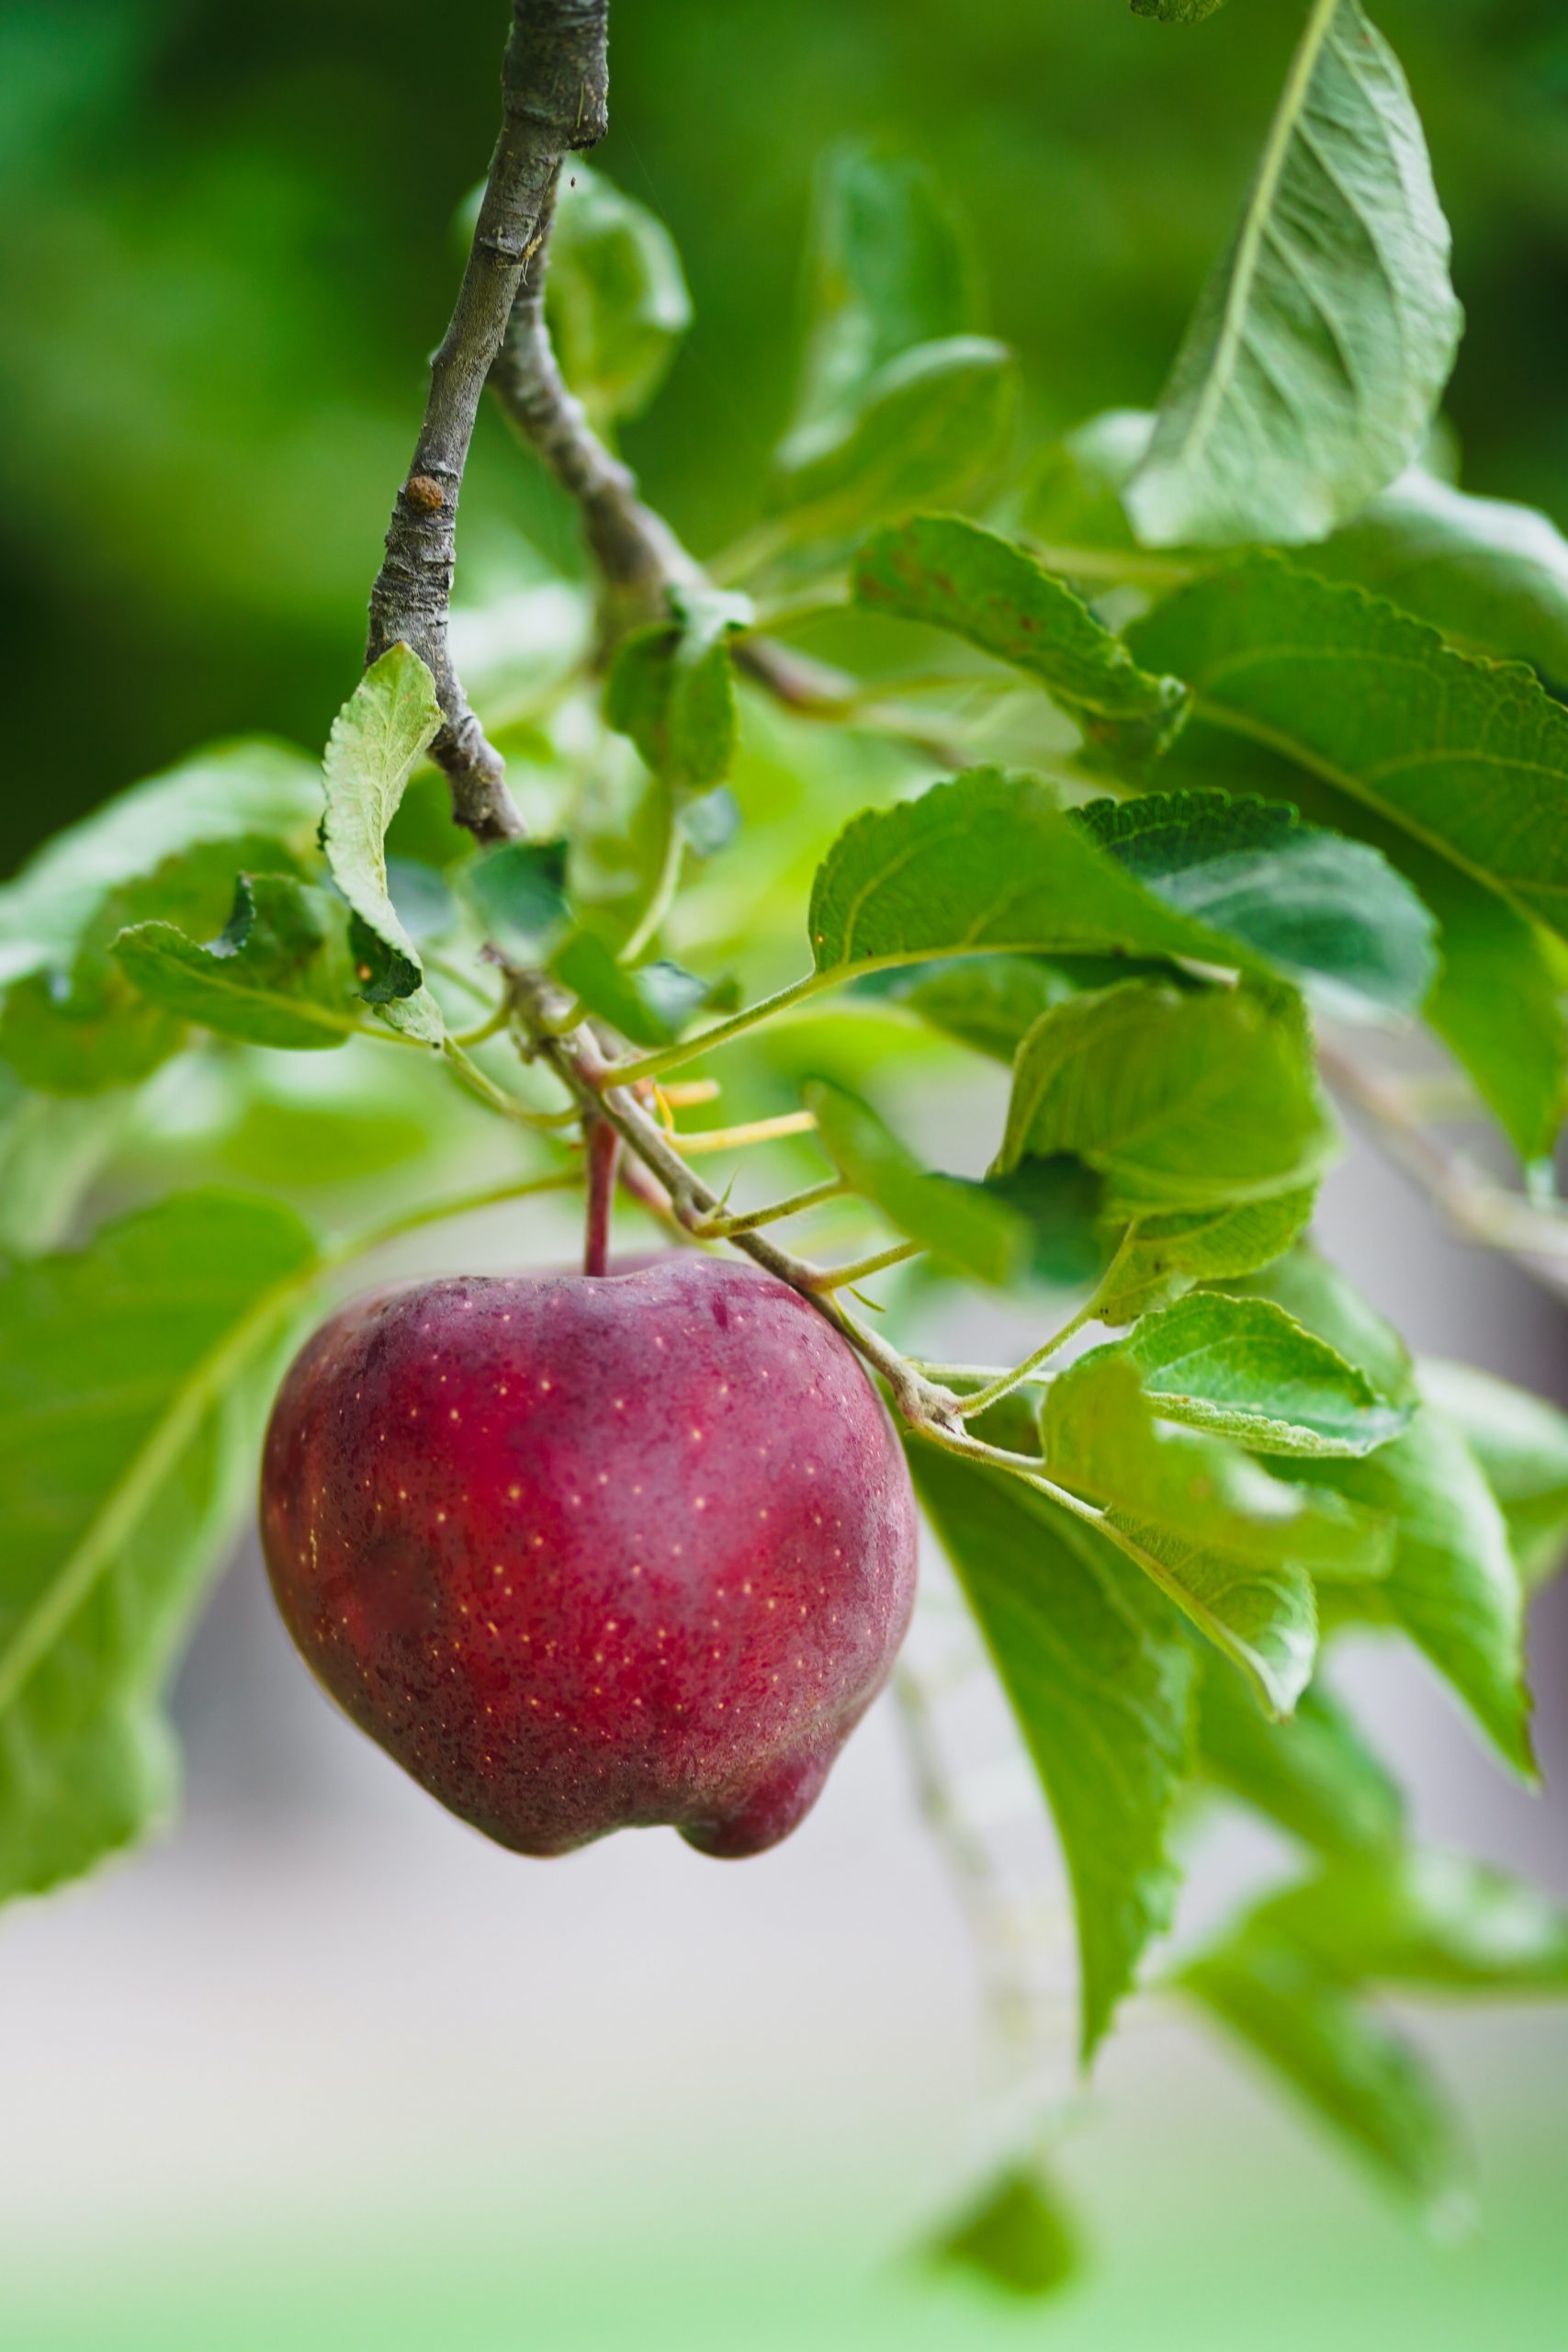 How Tall Do Apple Trees Grow? Does It Vary With Different Varieties?